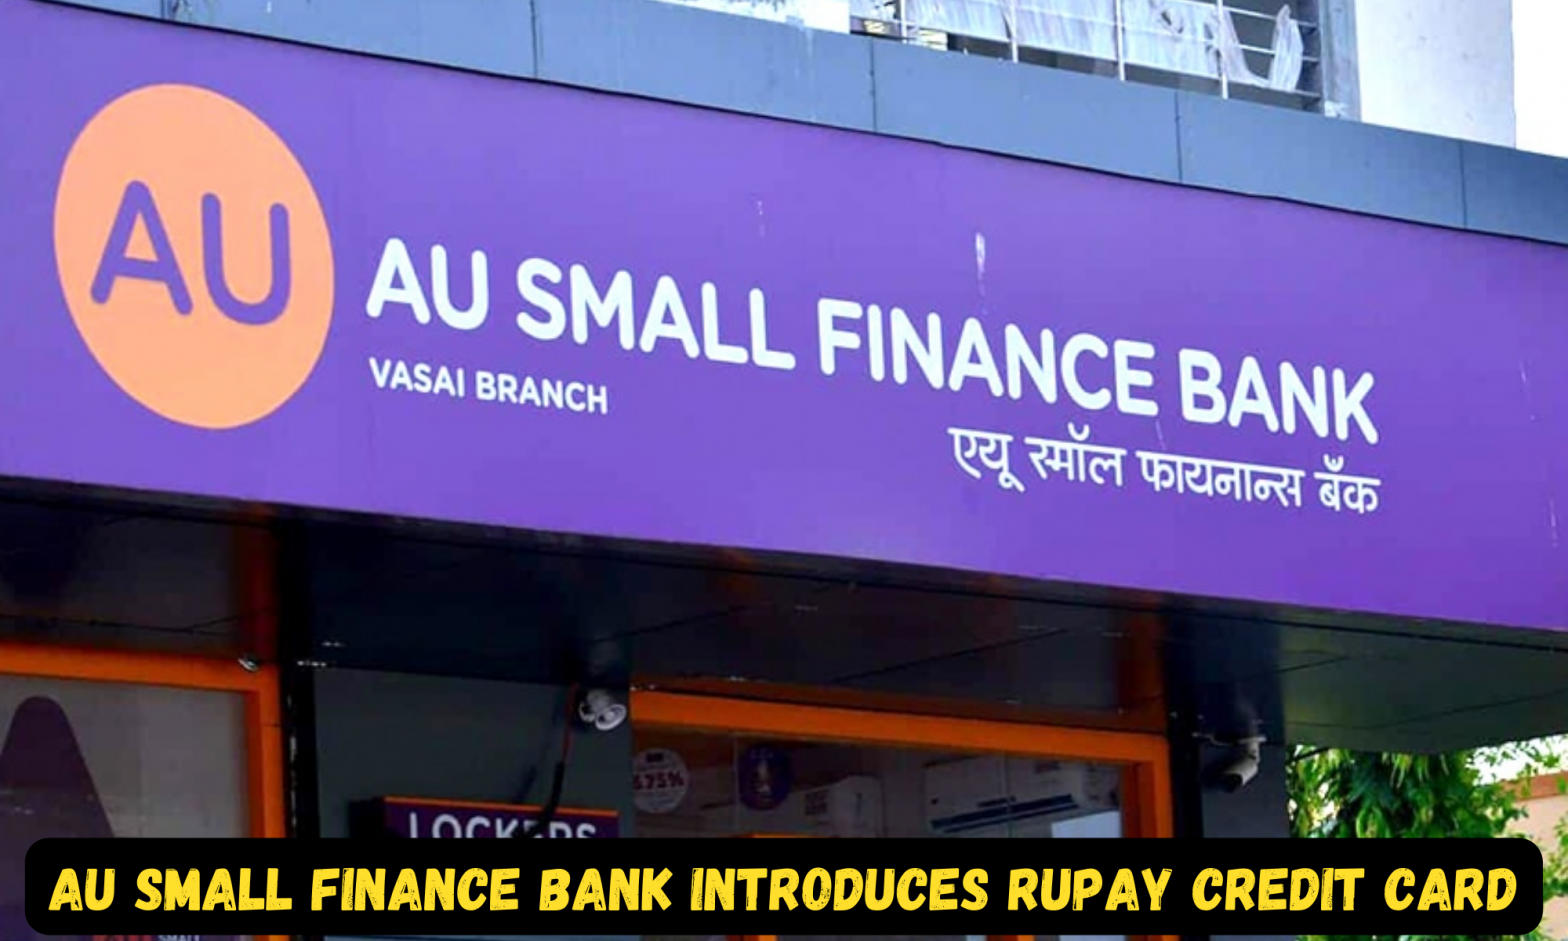 AU Small Finance Bank introduces RuPay credit card for self-employed Customers